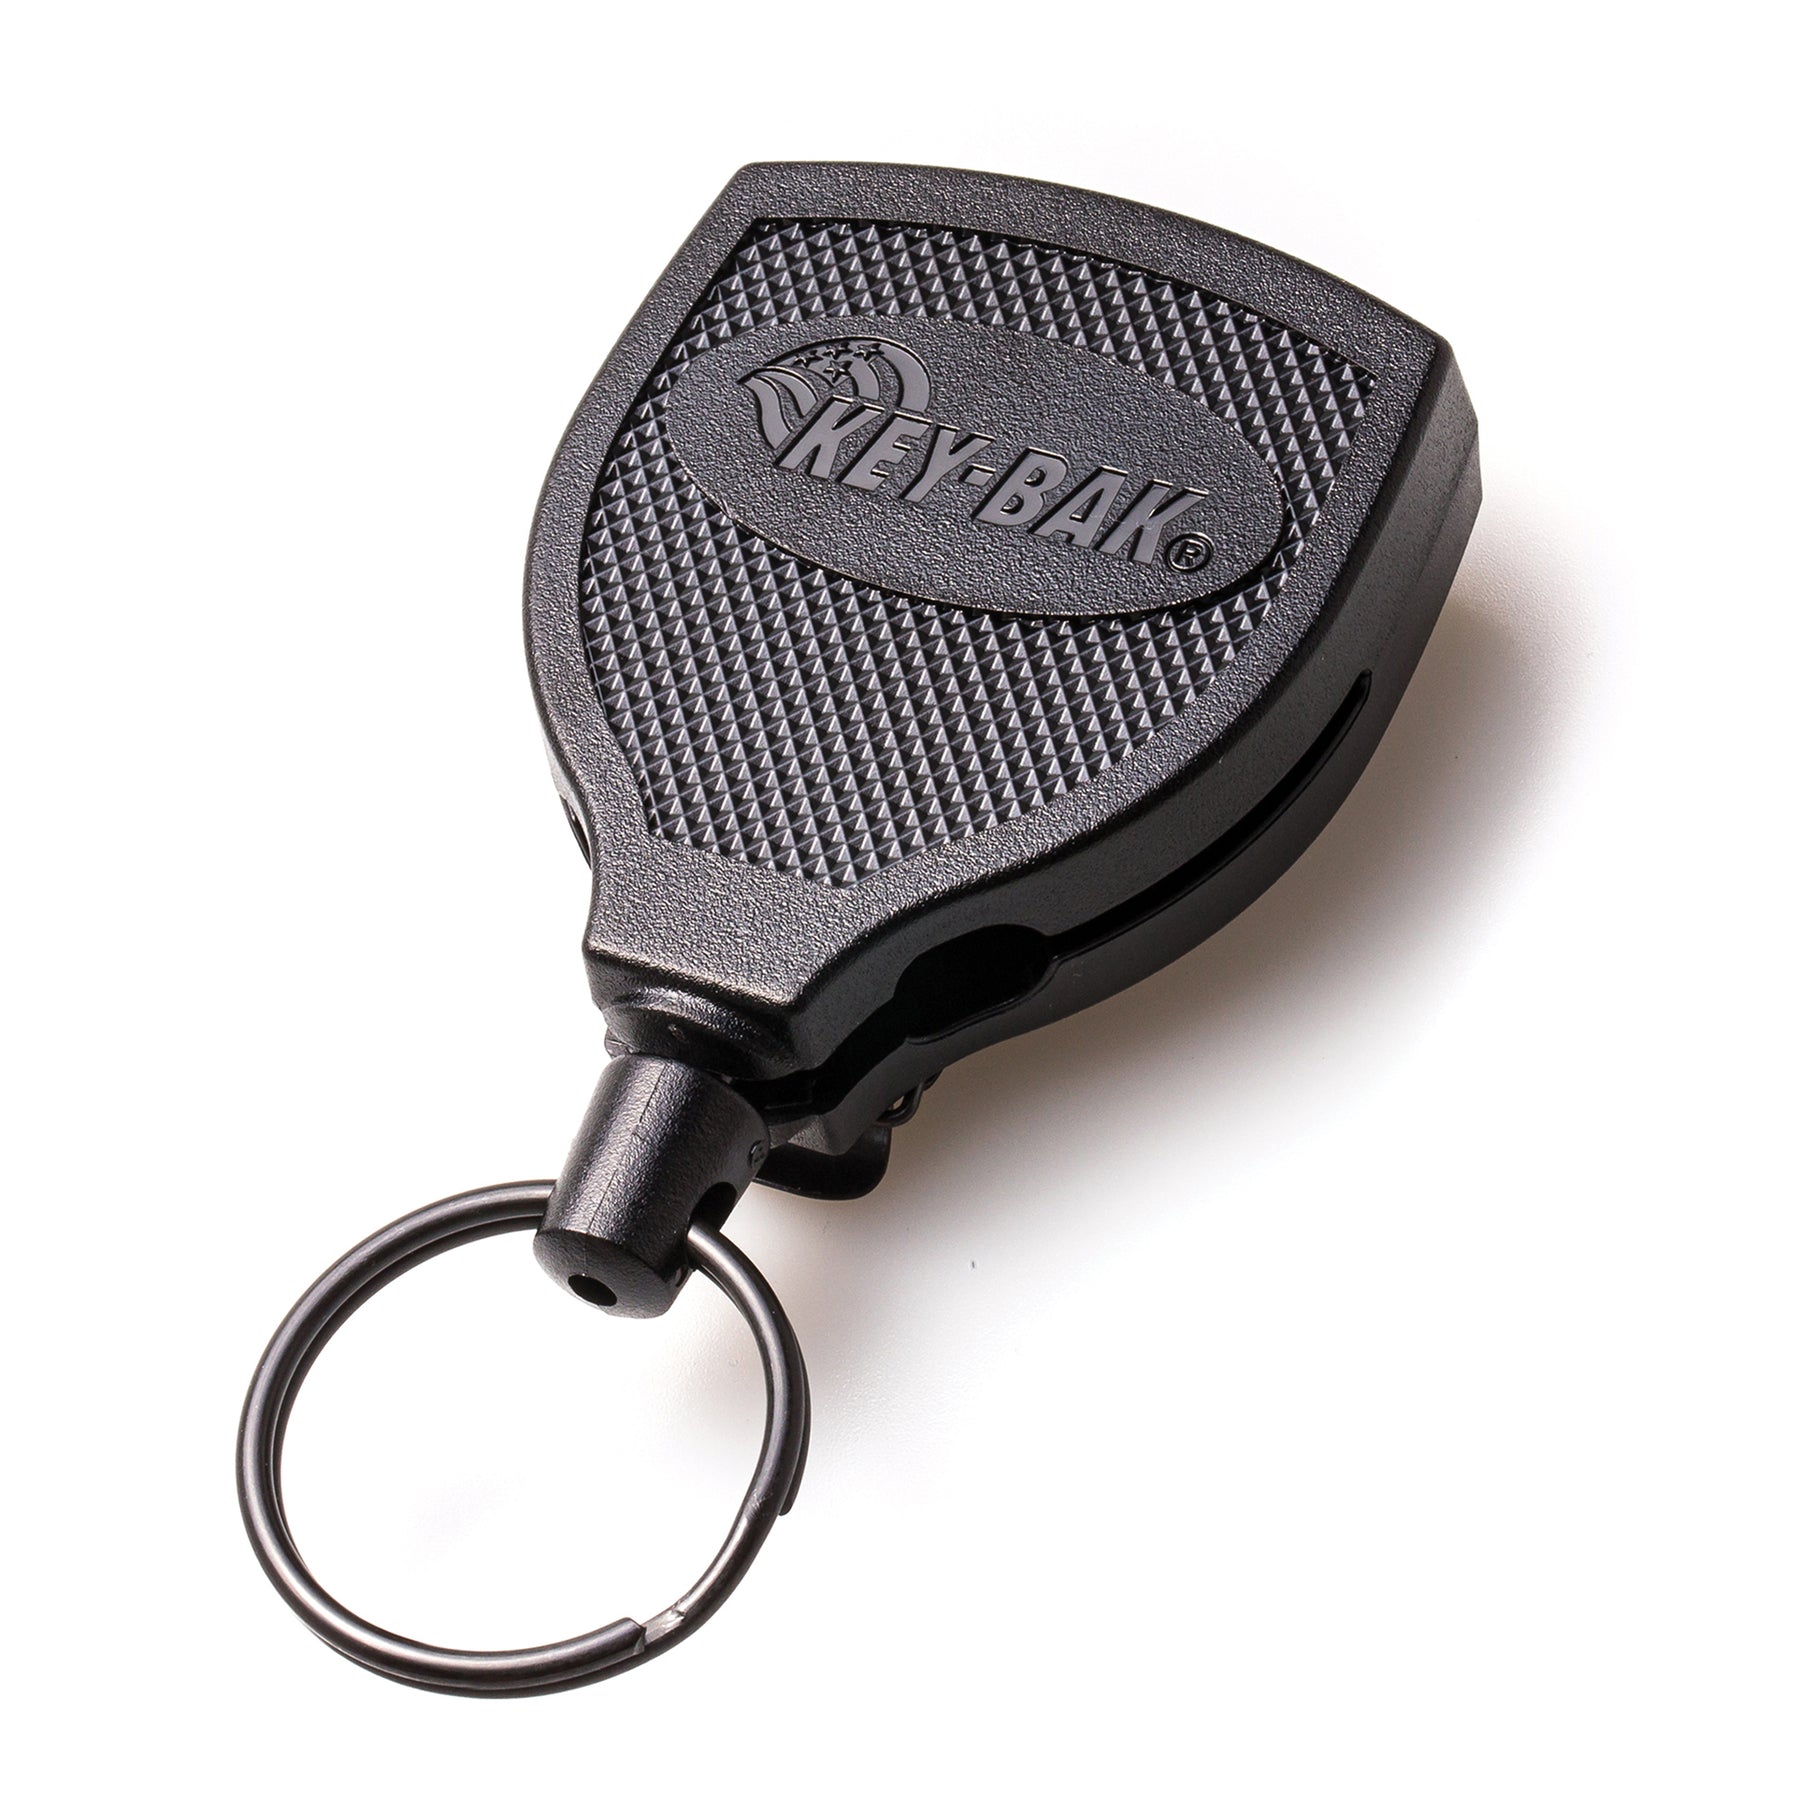 Shop Heavy Duty Retractable Id Holder Steel with great discounts